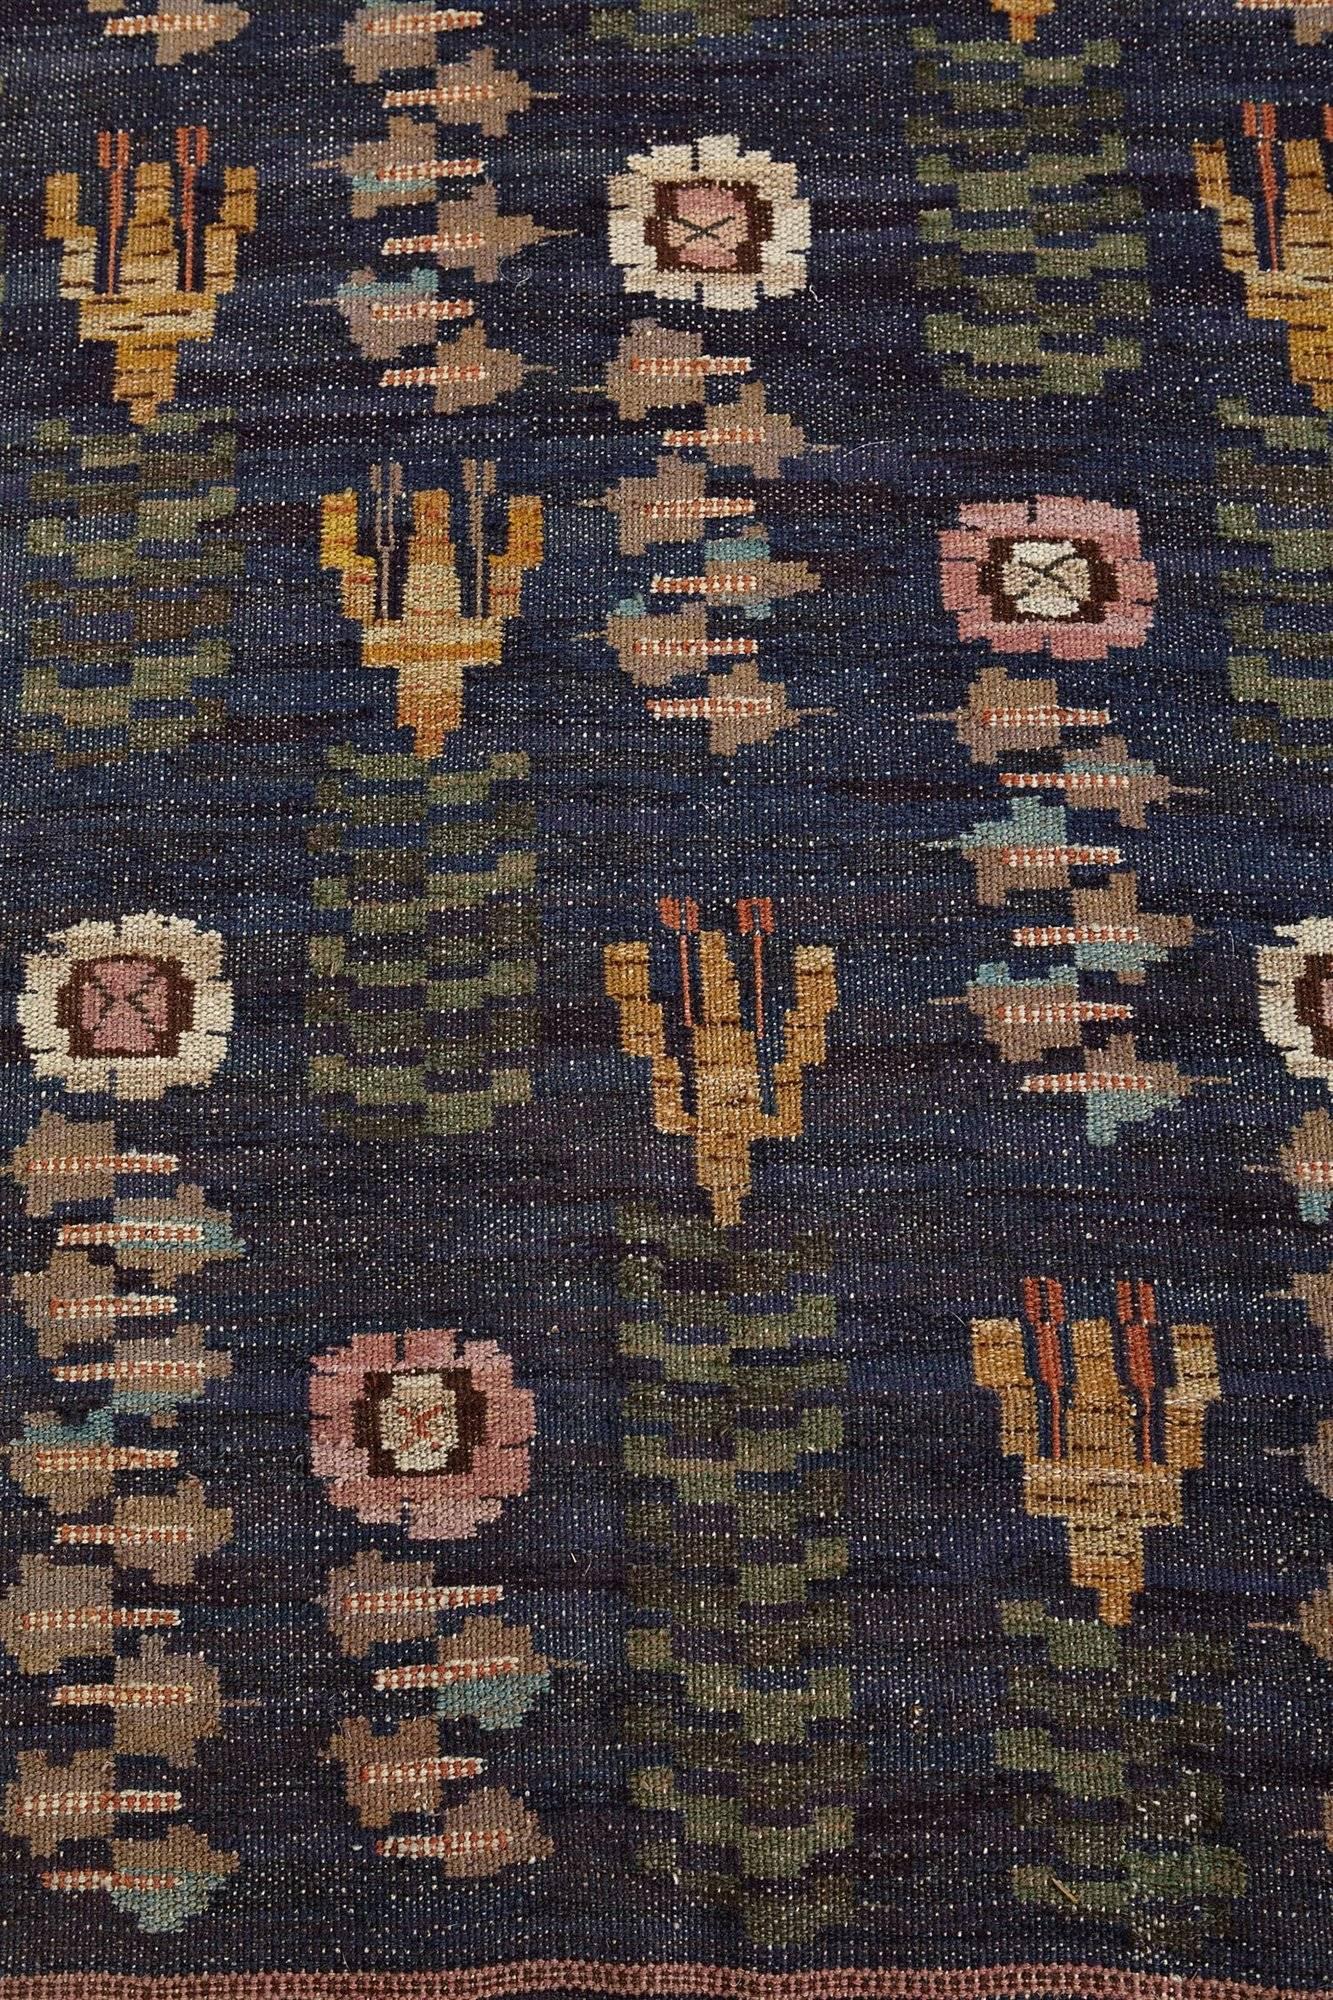 Rug, roses and lillies, designed by Marta Maas-Fjetterström, for MMF, Sweden. 1930s. Rug/tapestry. Very rare design. Pure wool. Tapestry technique.

Measures: L 255 cm/ 8' 4 1/2